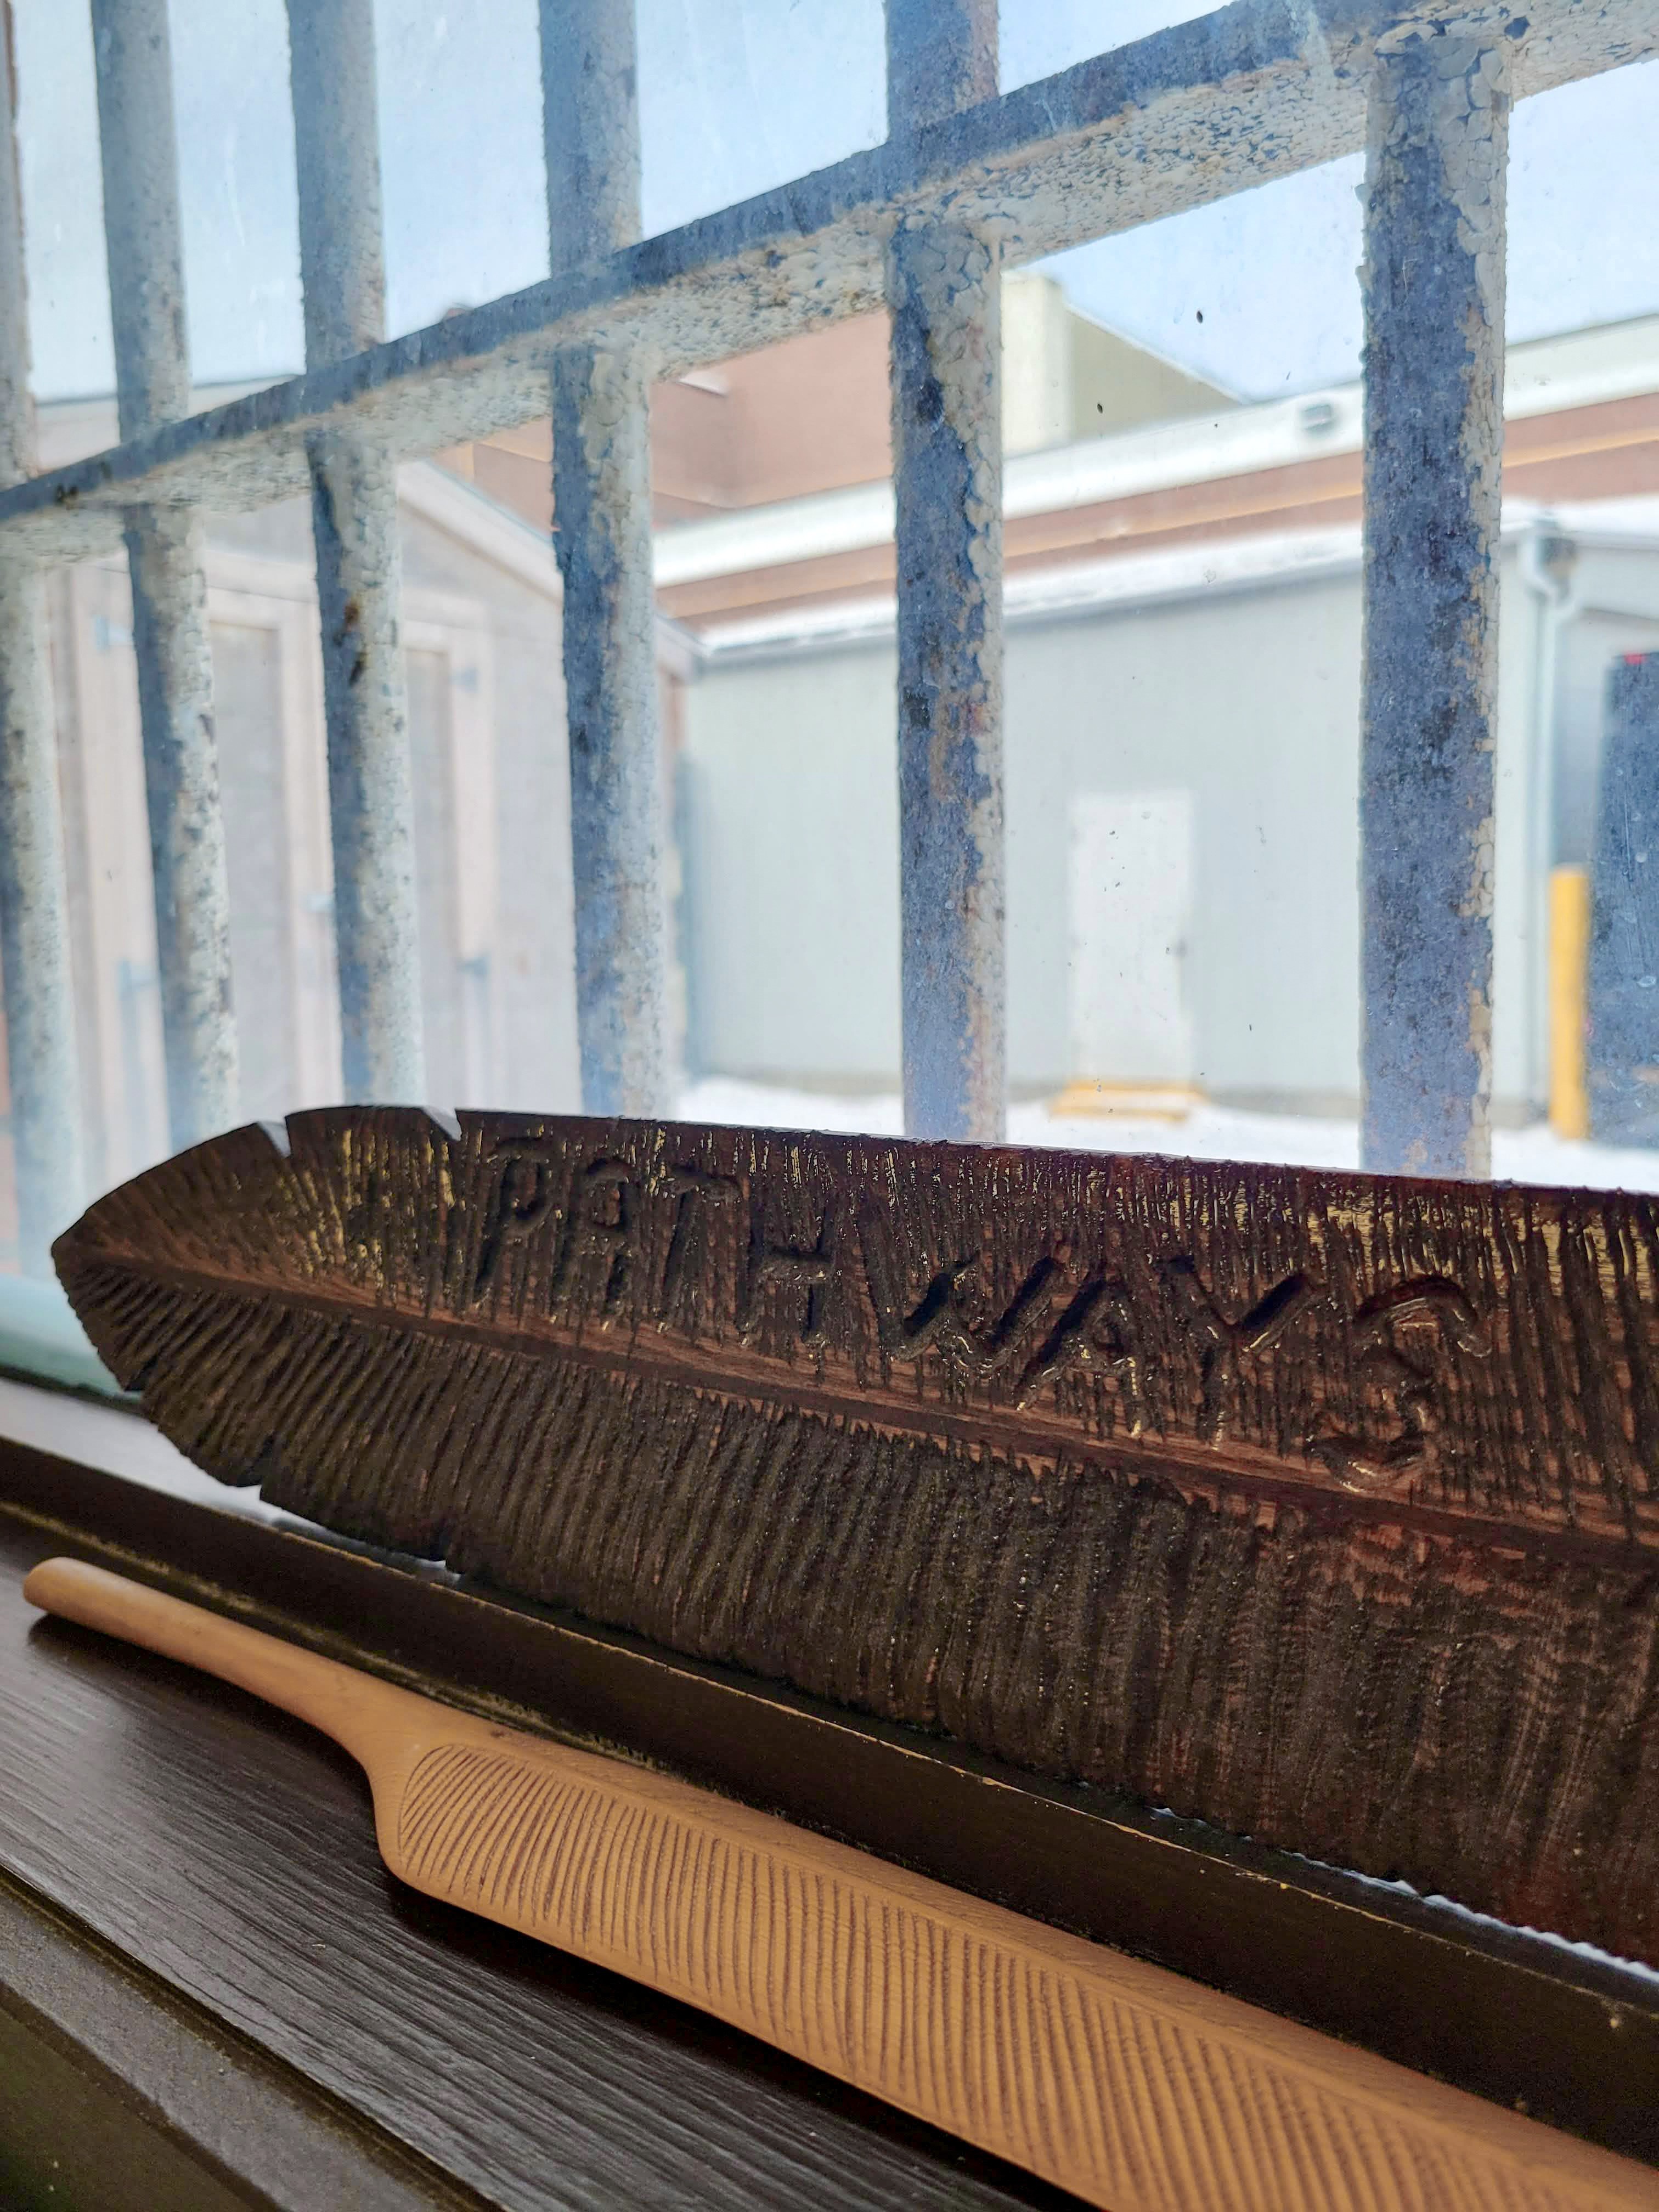 Saskatchewan Penitentiary. A feather carved out of wood with the word “Pathways” etched into it.